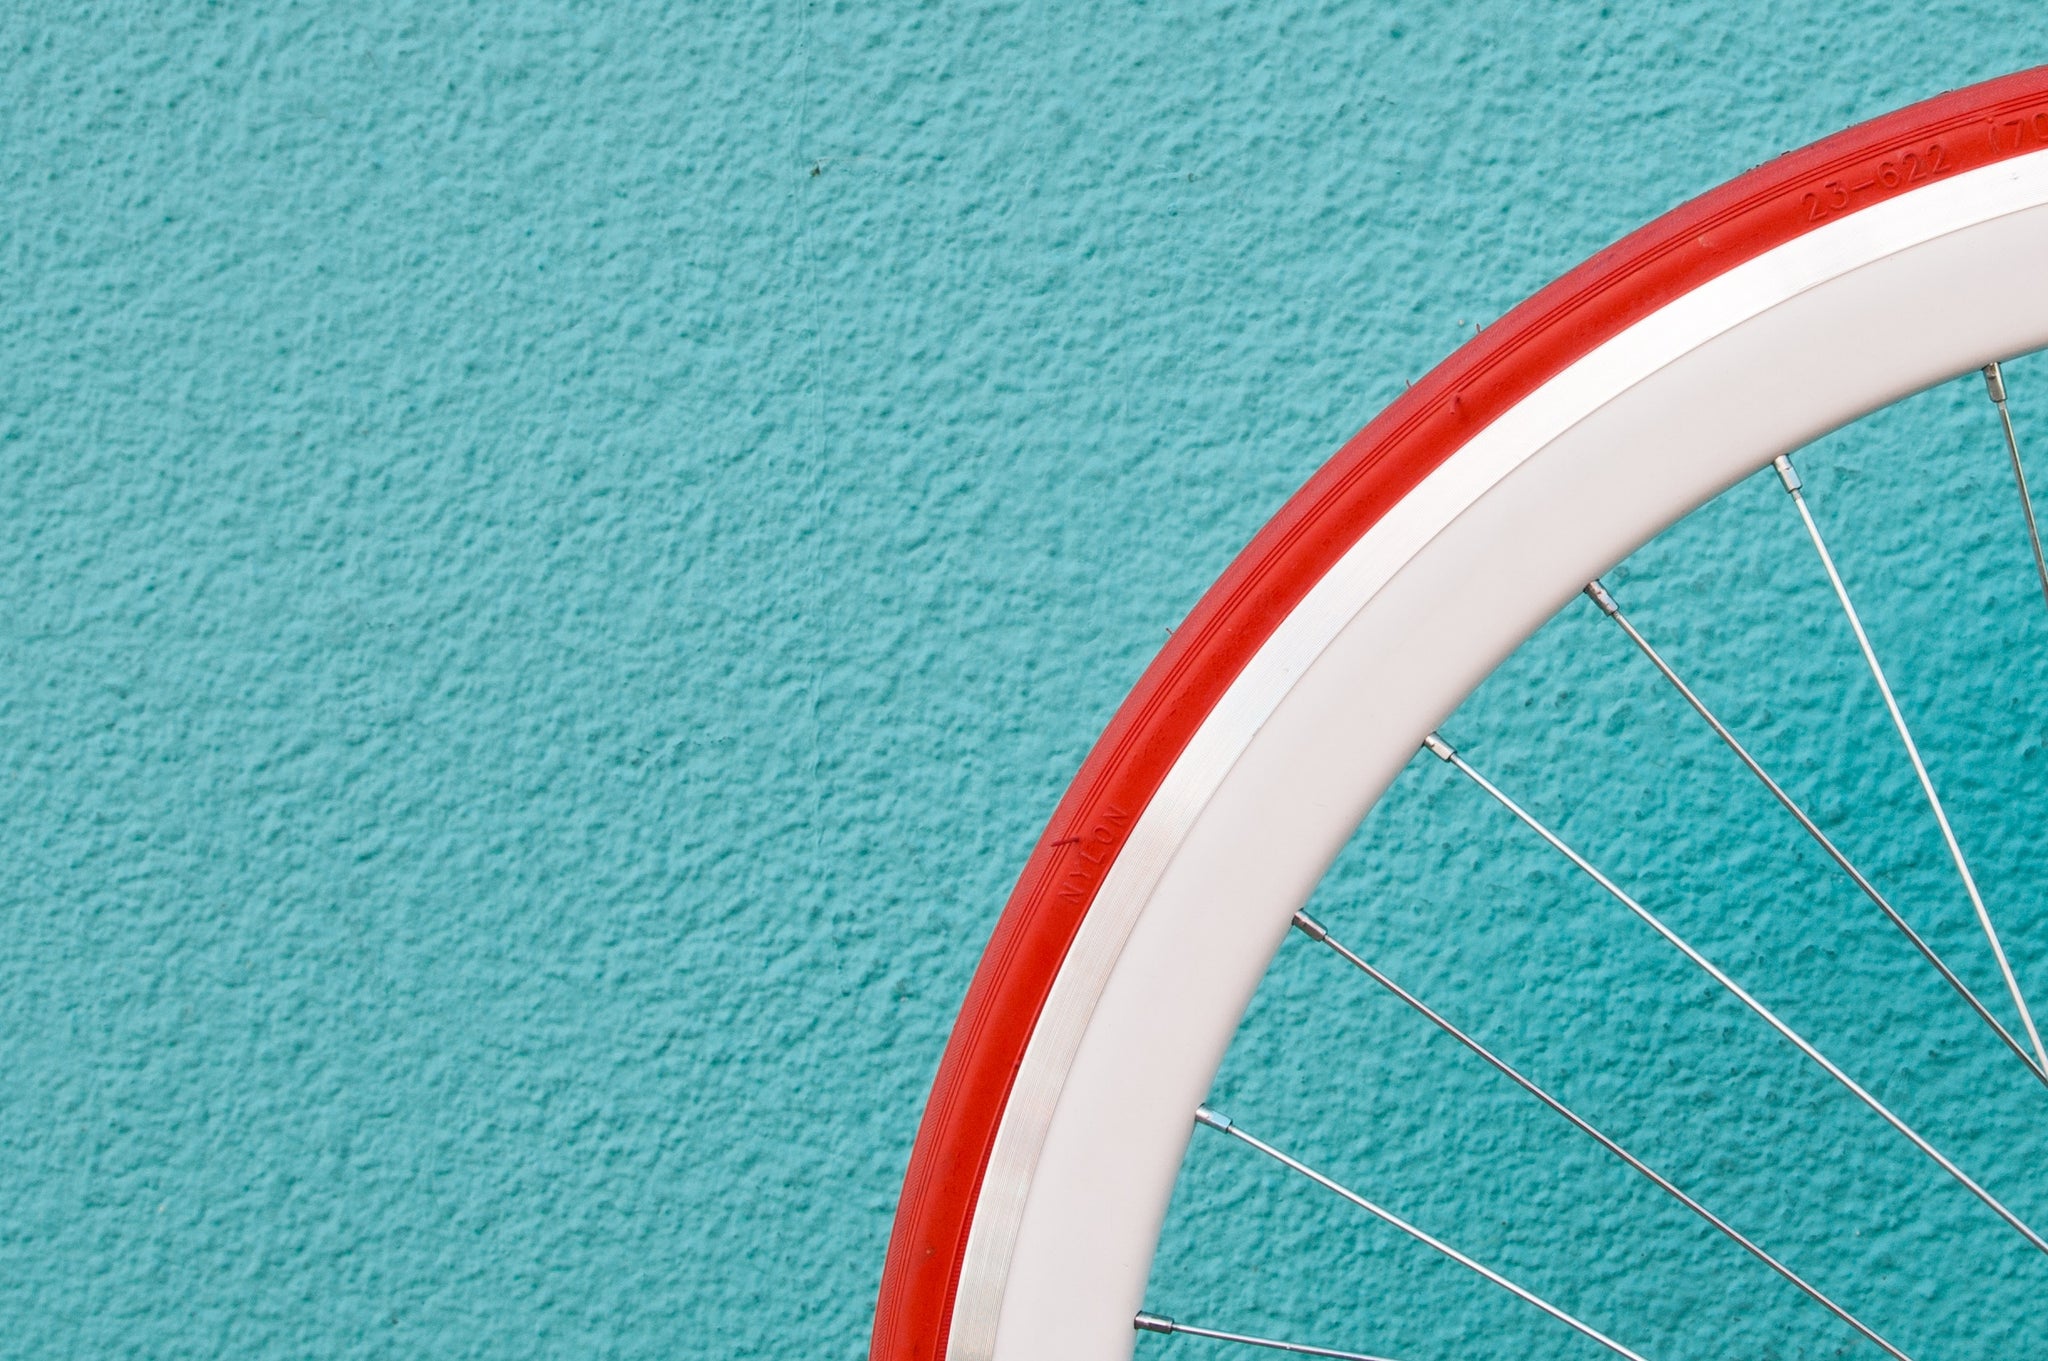 A White bicycle wheel with a red tire against a blue wall.